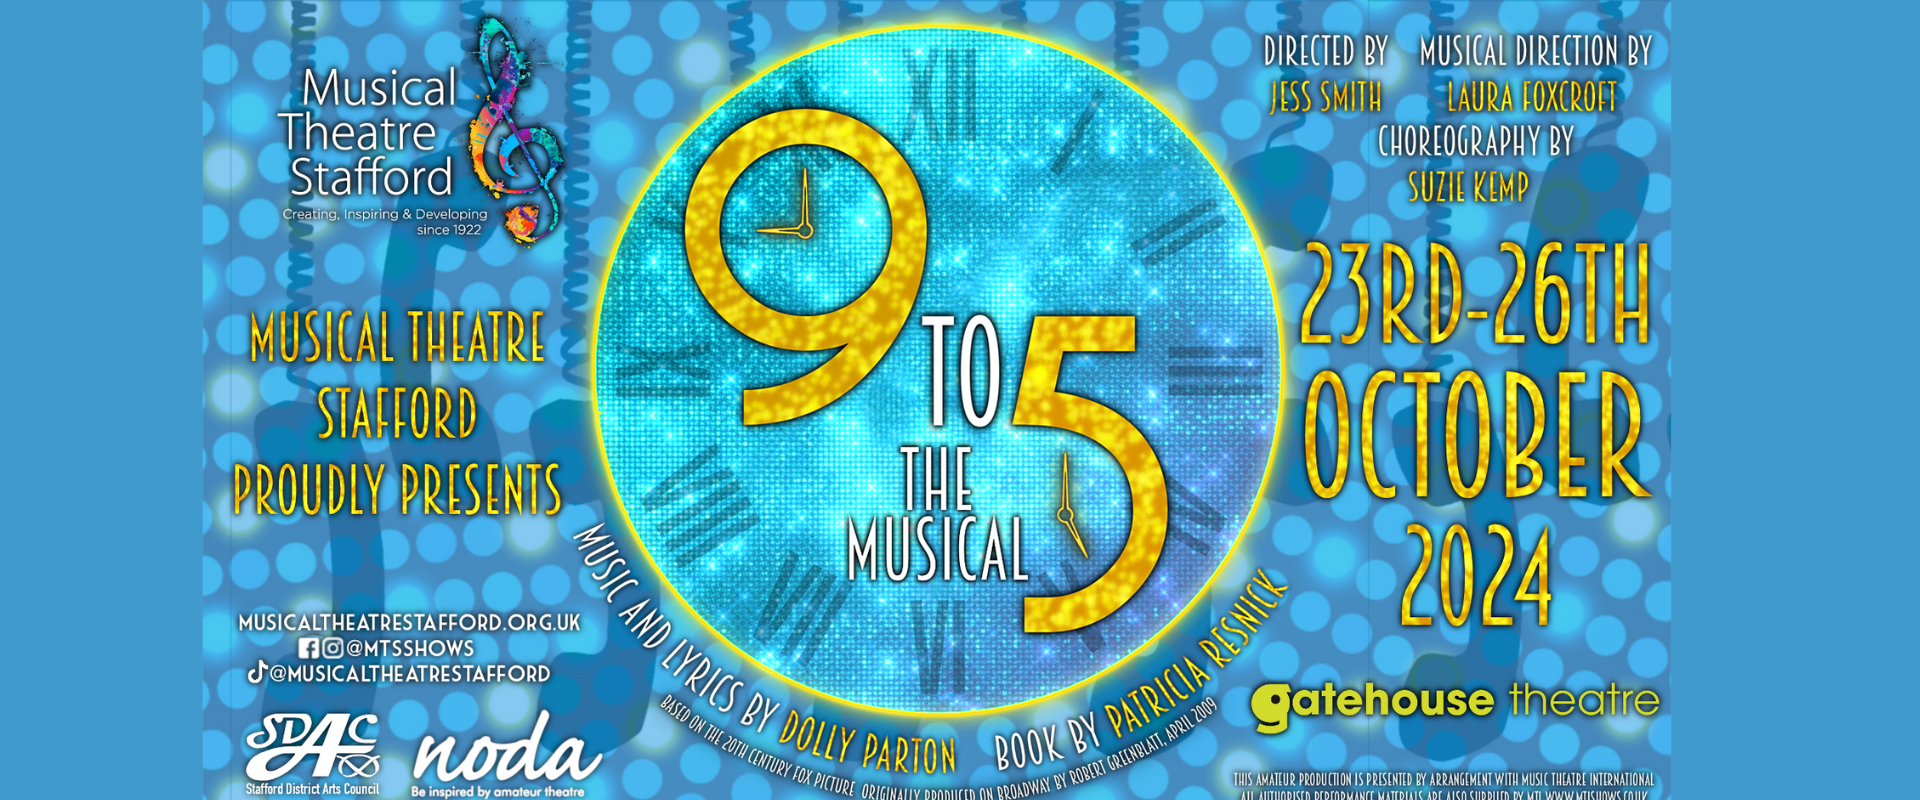 Musical Theatre Stafford presents 9 to 5 The Musical